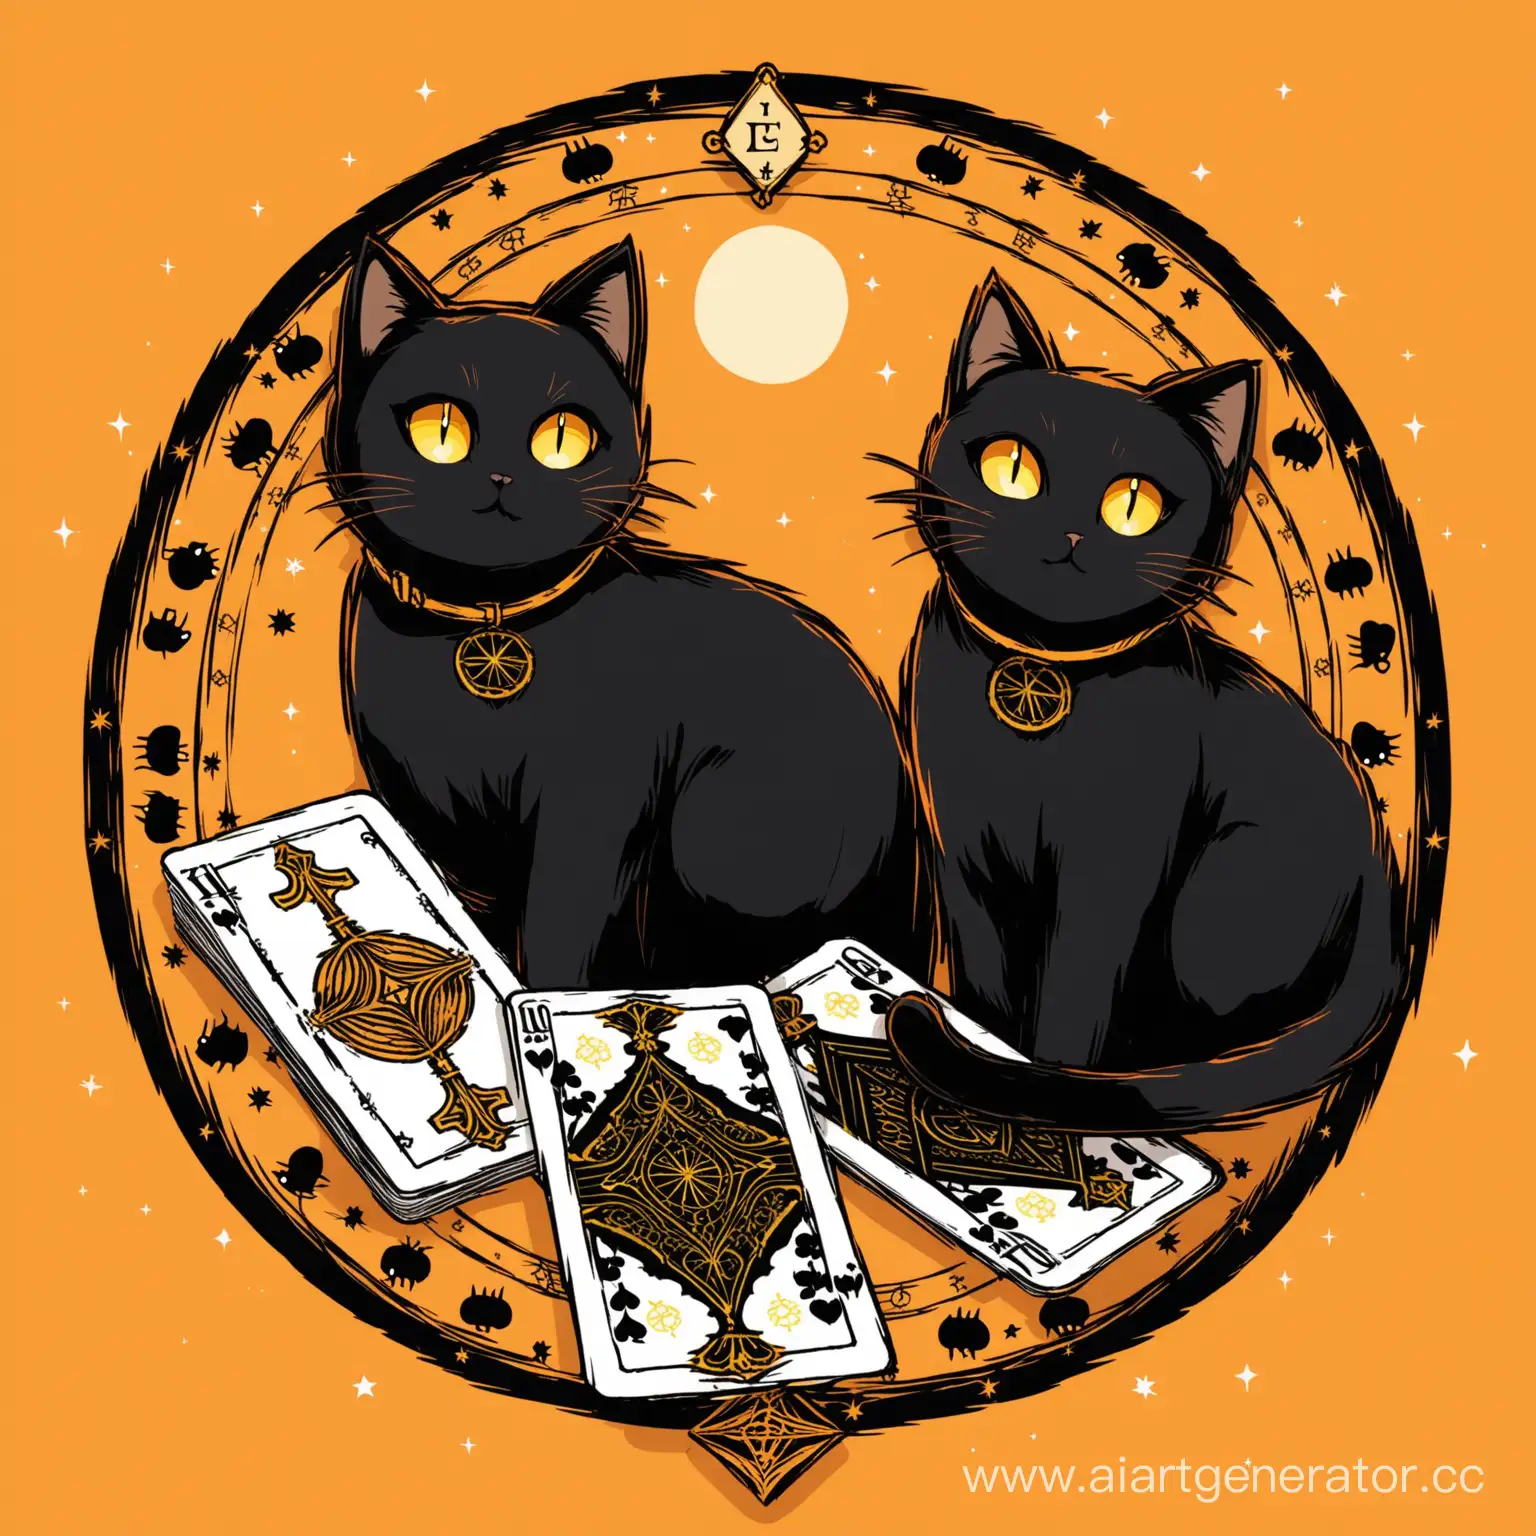 Mystical-Black-Cats-with-Yellow-Eyes-and-Tarot-Cards-on-Soft-Orange-Background